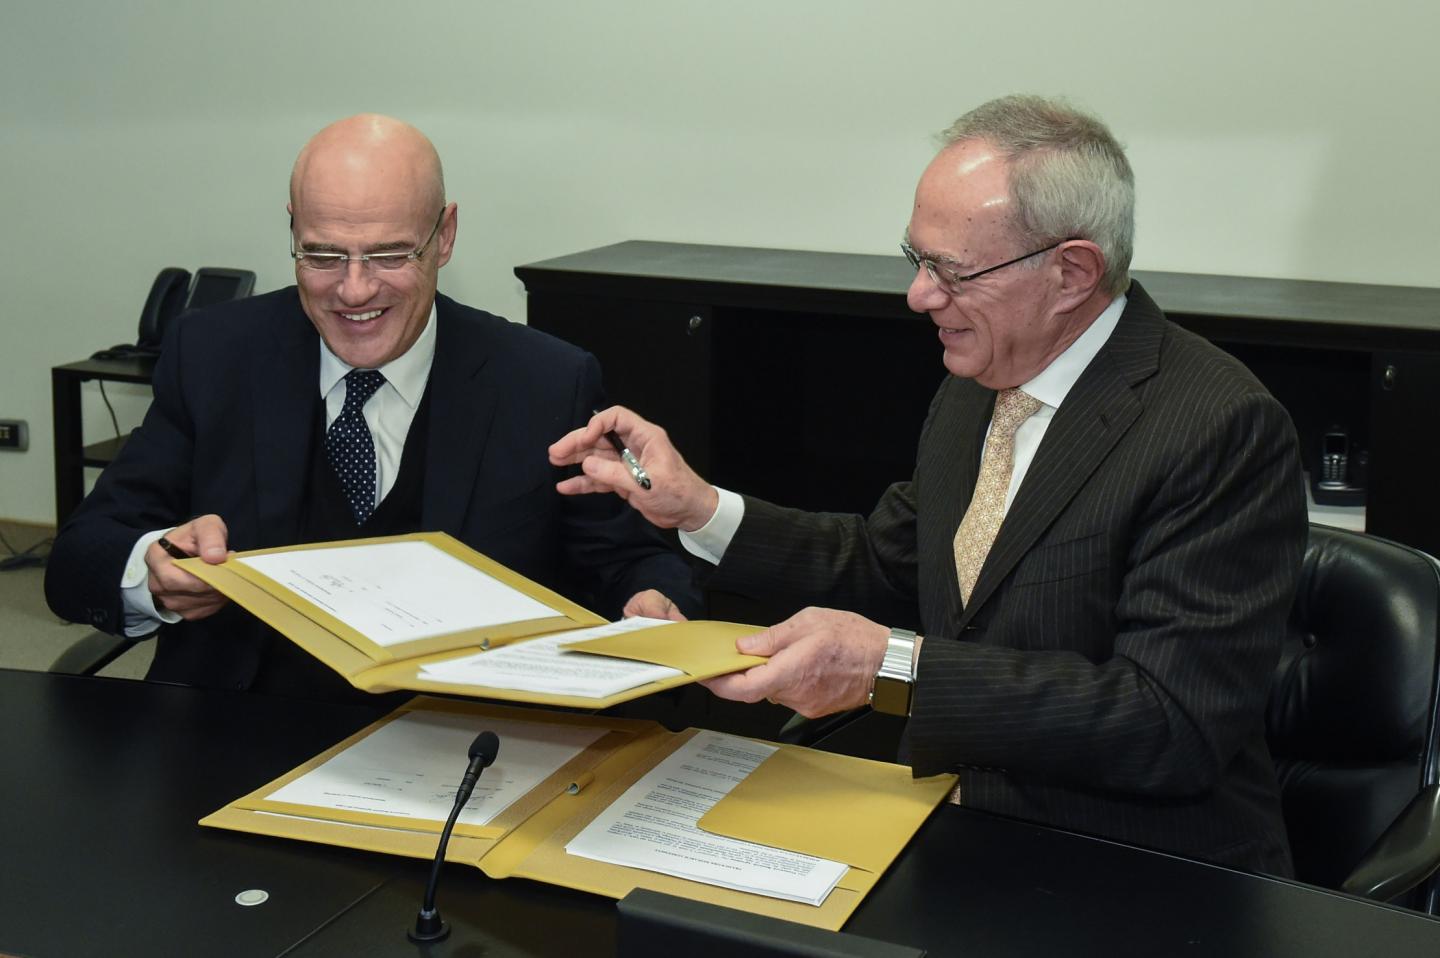 Eni CEO Claudio Descalzi and MIT President L. Rafael Reif Sign Agreement